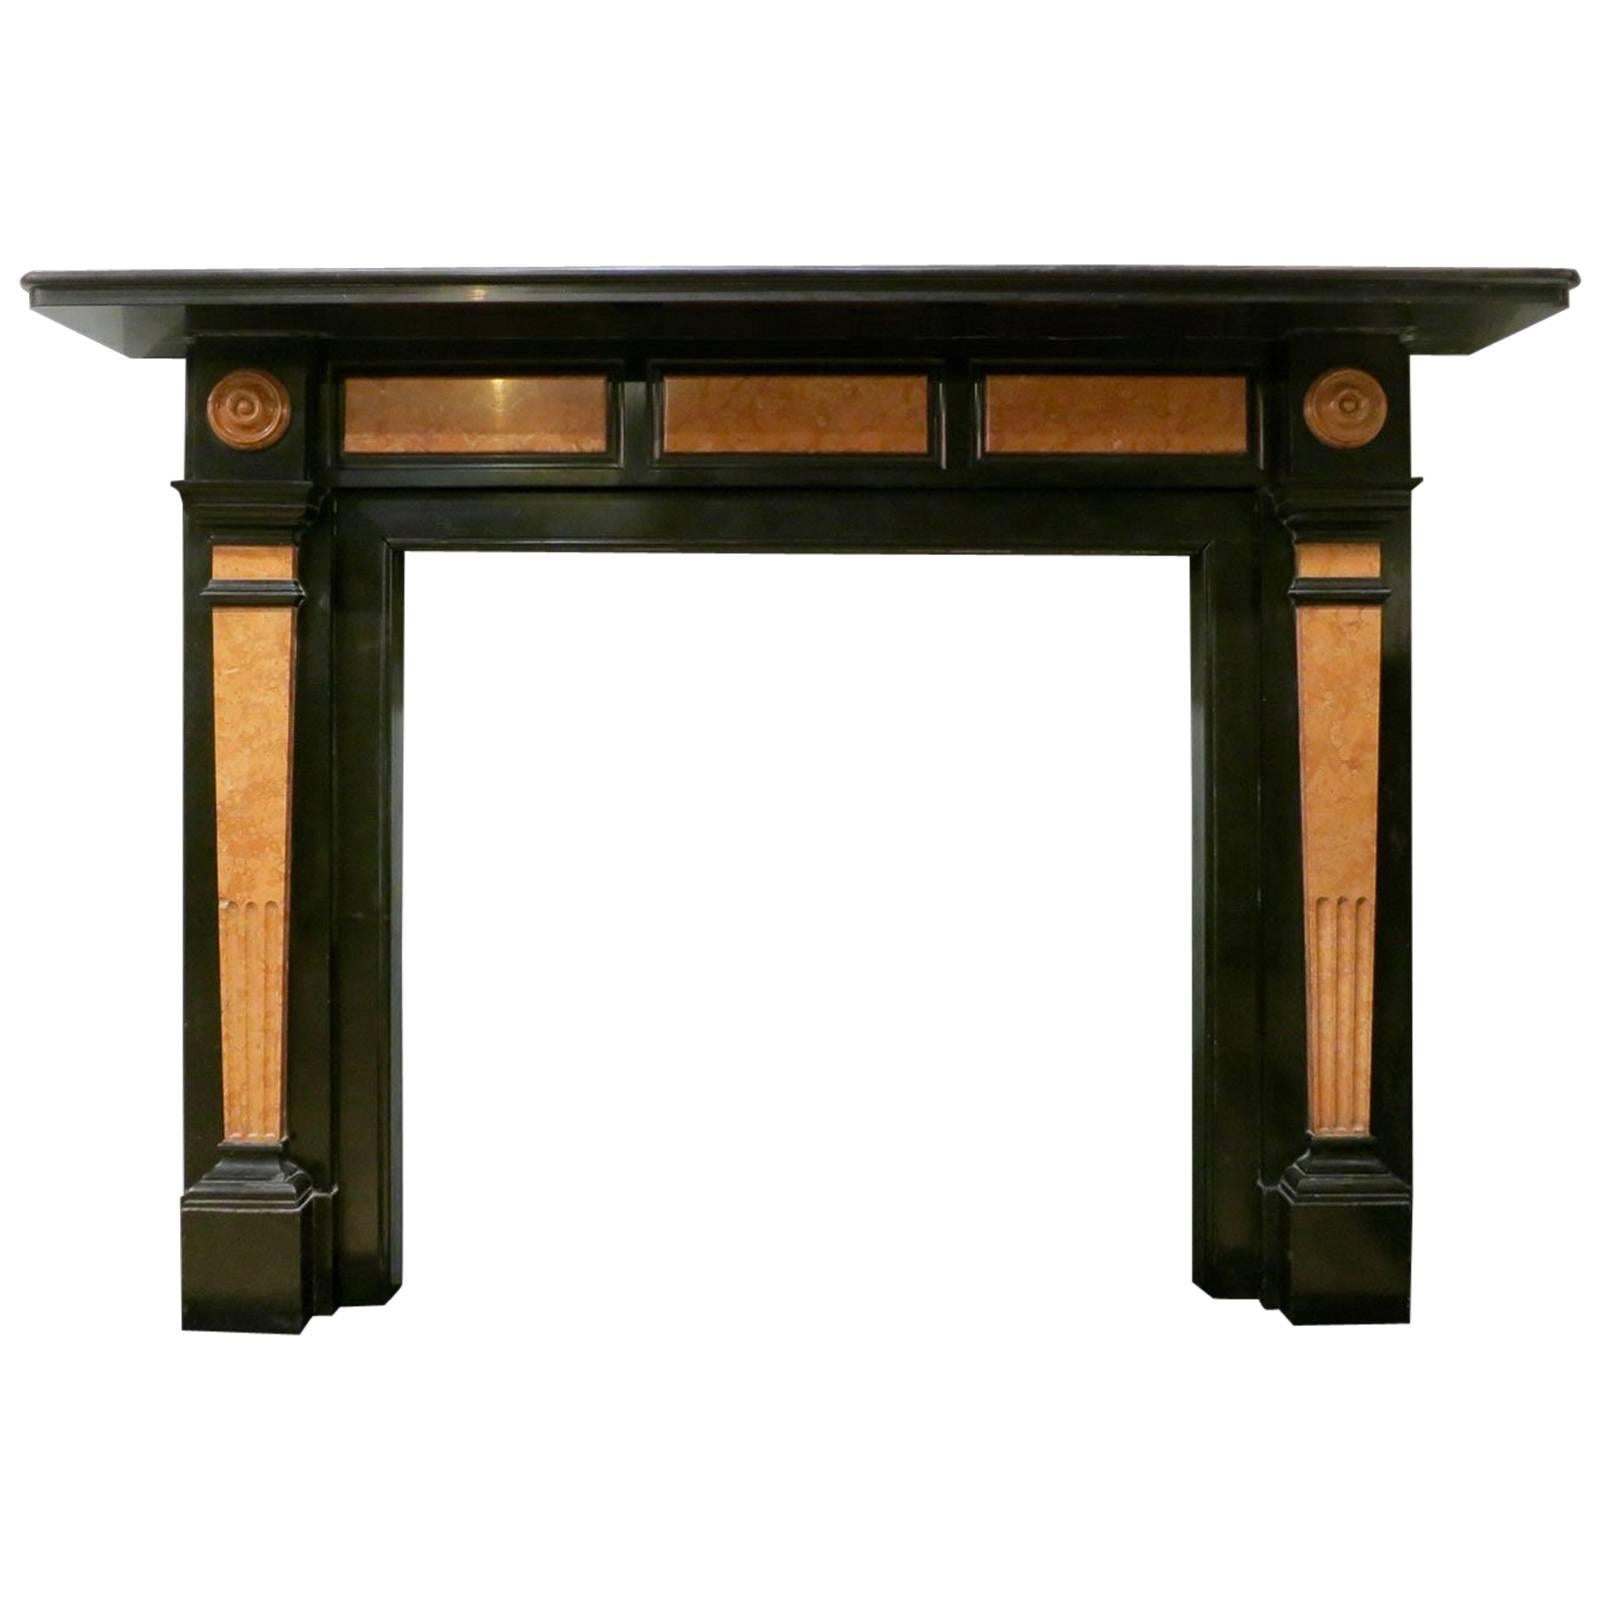 19th Century Belgian Black Marble English Fireplace Mantel For Sale